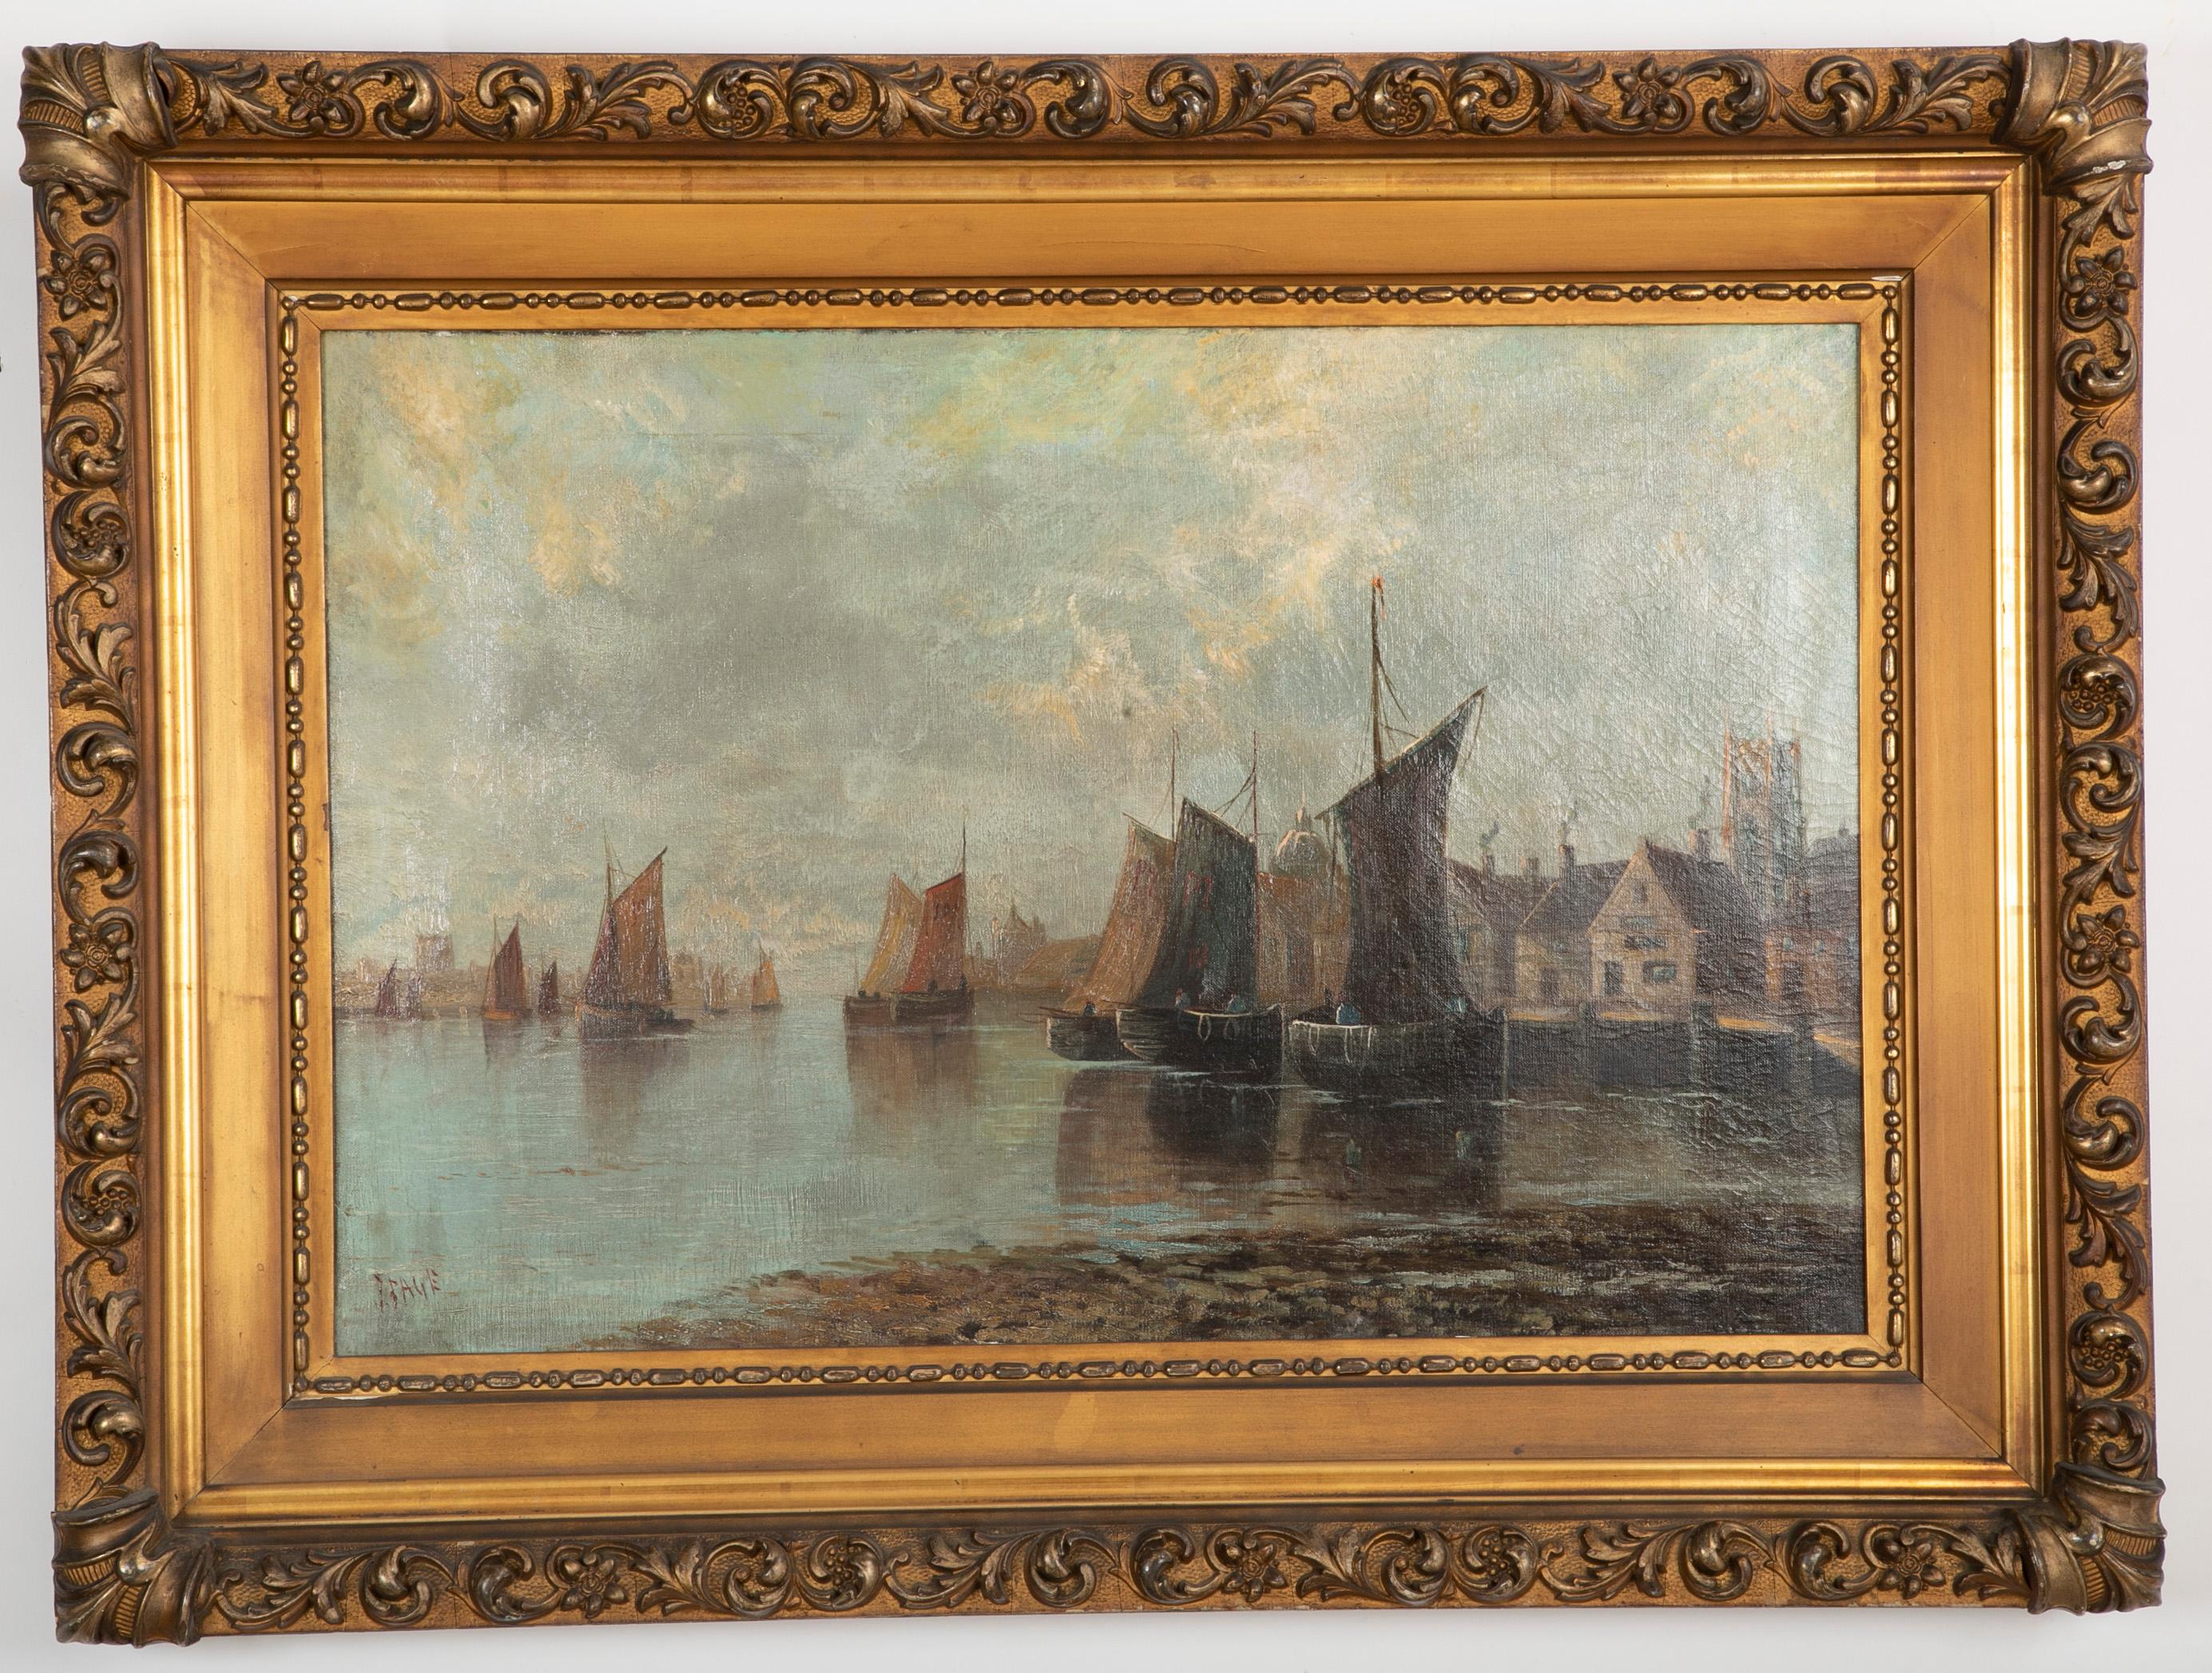 An oil on canvas of port scene by J. Bage.